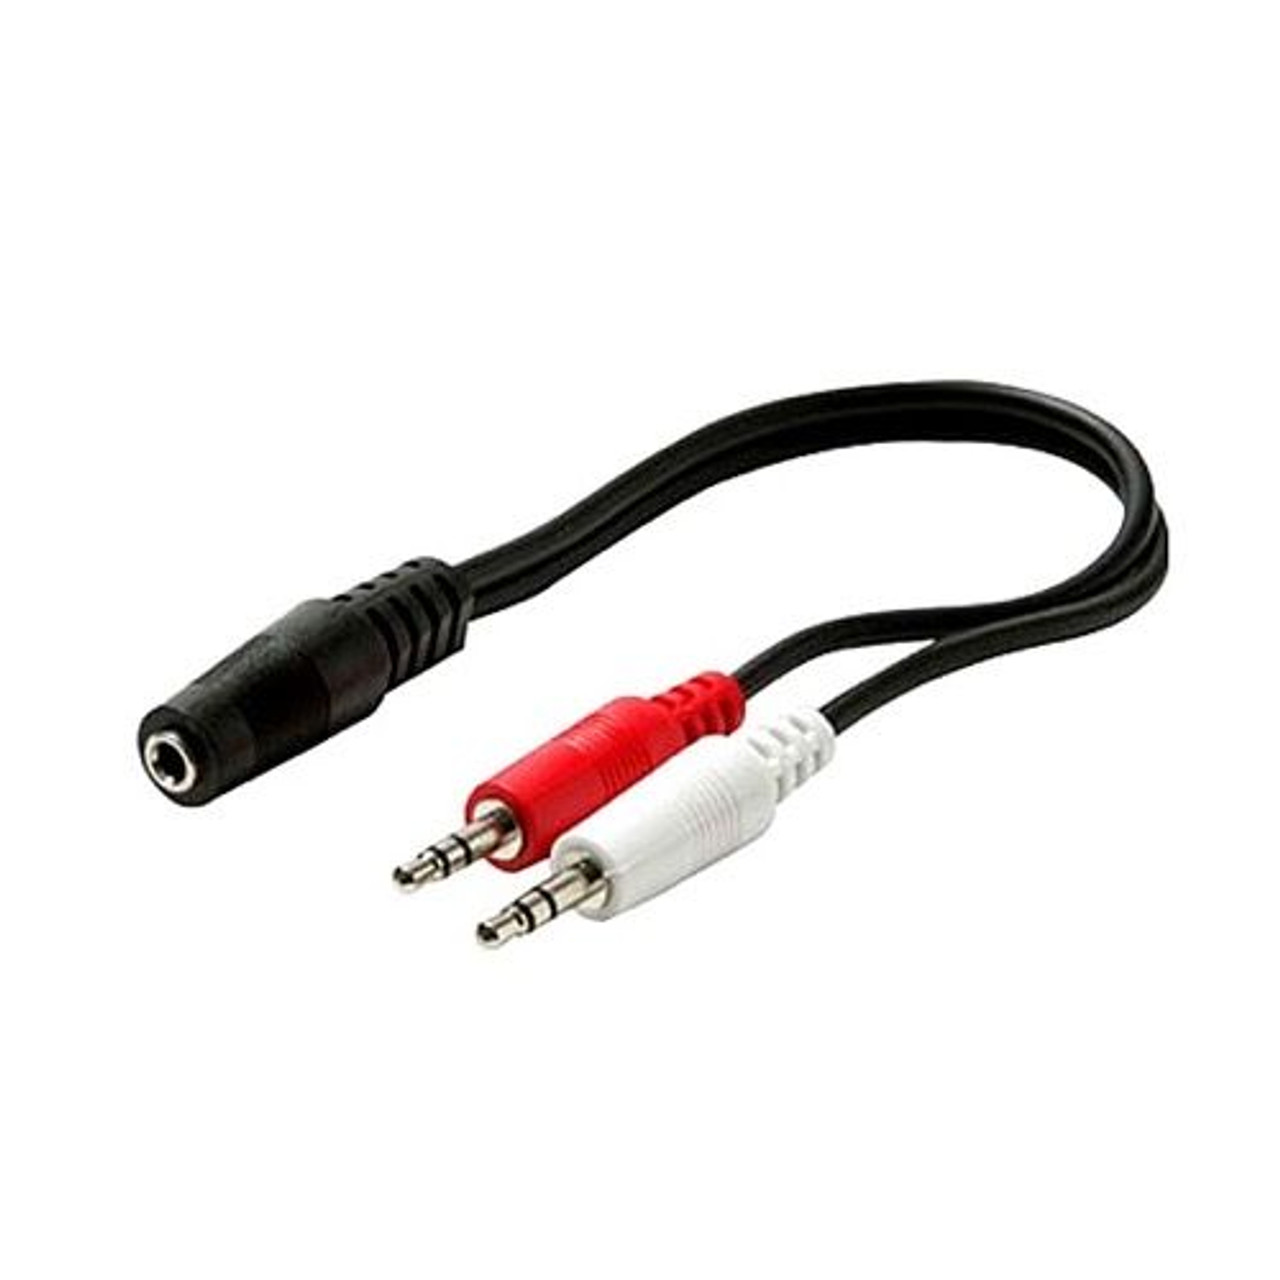 Steren 255-039 6" Inch 3.5mm Y Female Stereo Cable Jack to 2 3.5mm Male Adapter Plugs Shielded 3.5 mm Stereo Audio Splitter Cable Signal Separating Shielded Push-In Component Jack Plug Connector, Part # 255039